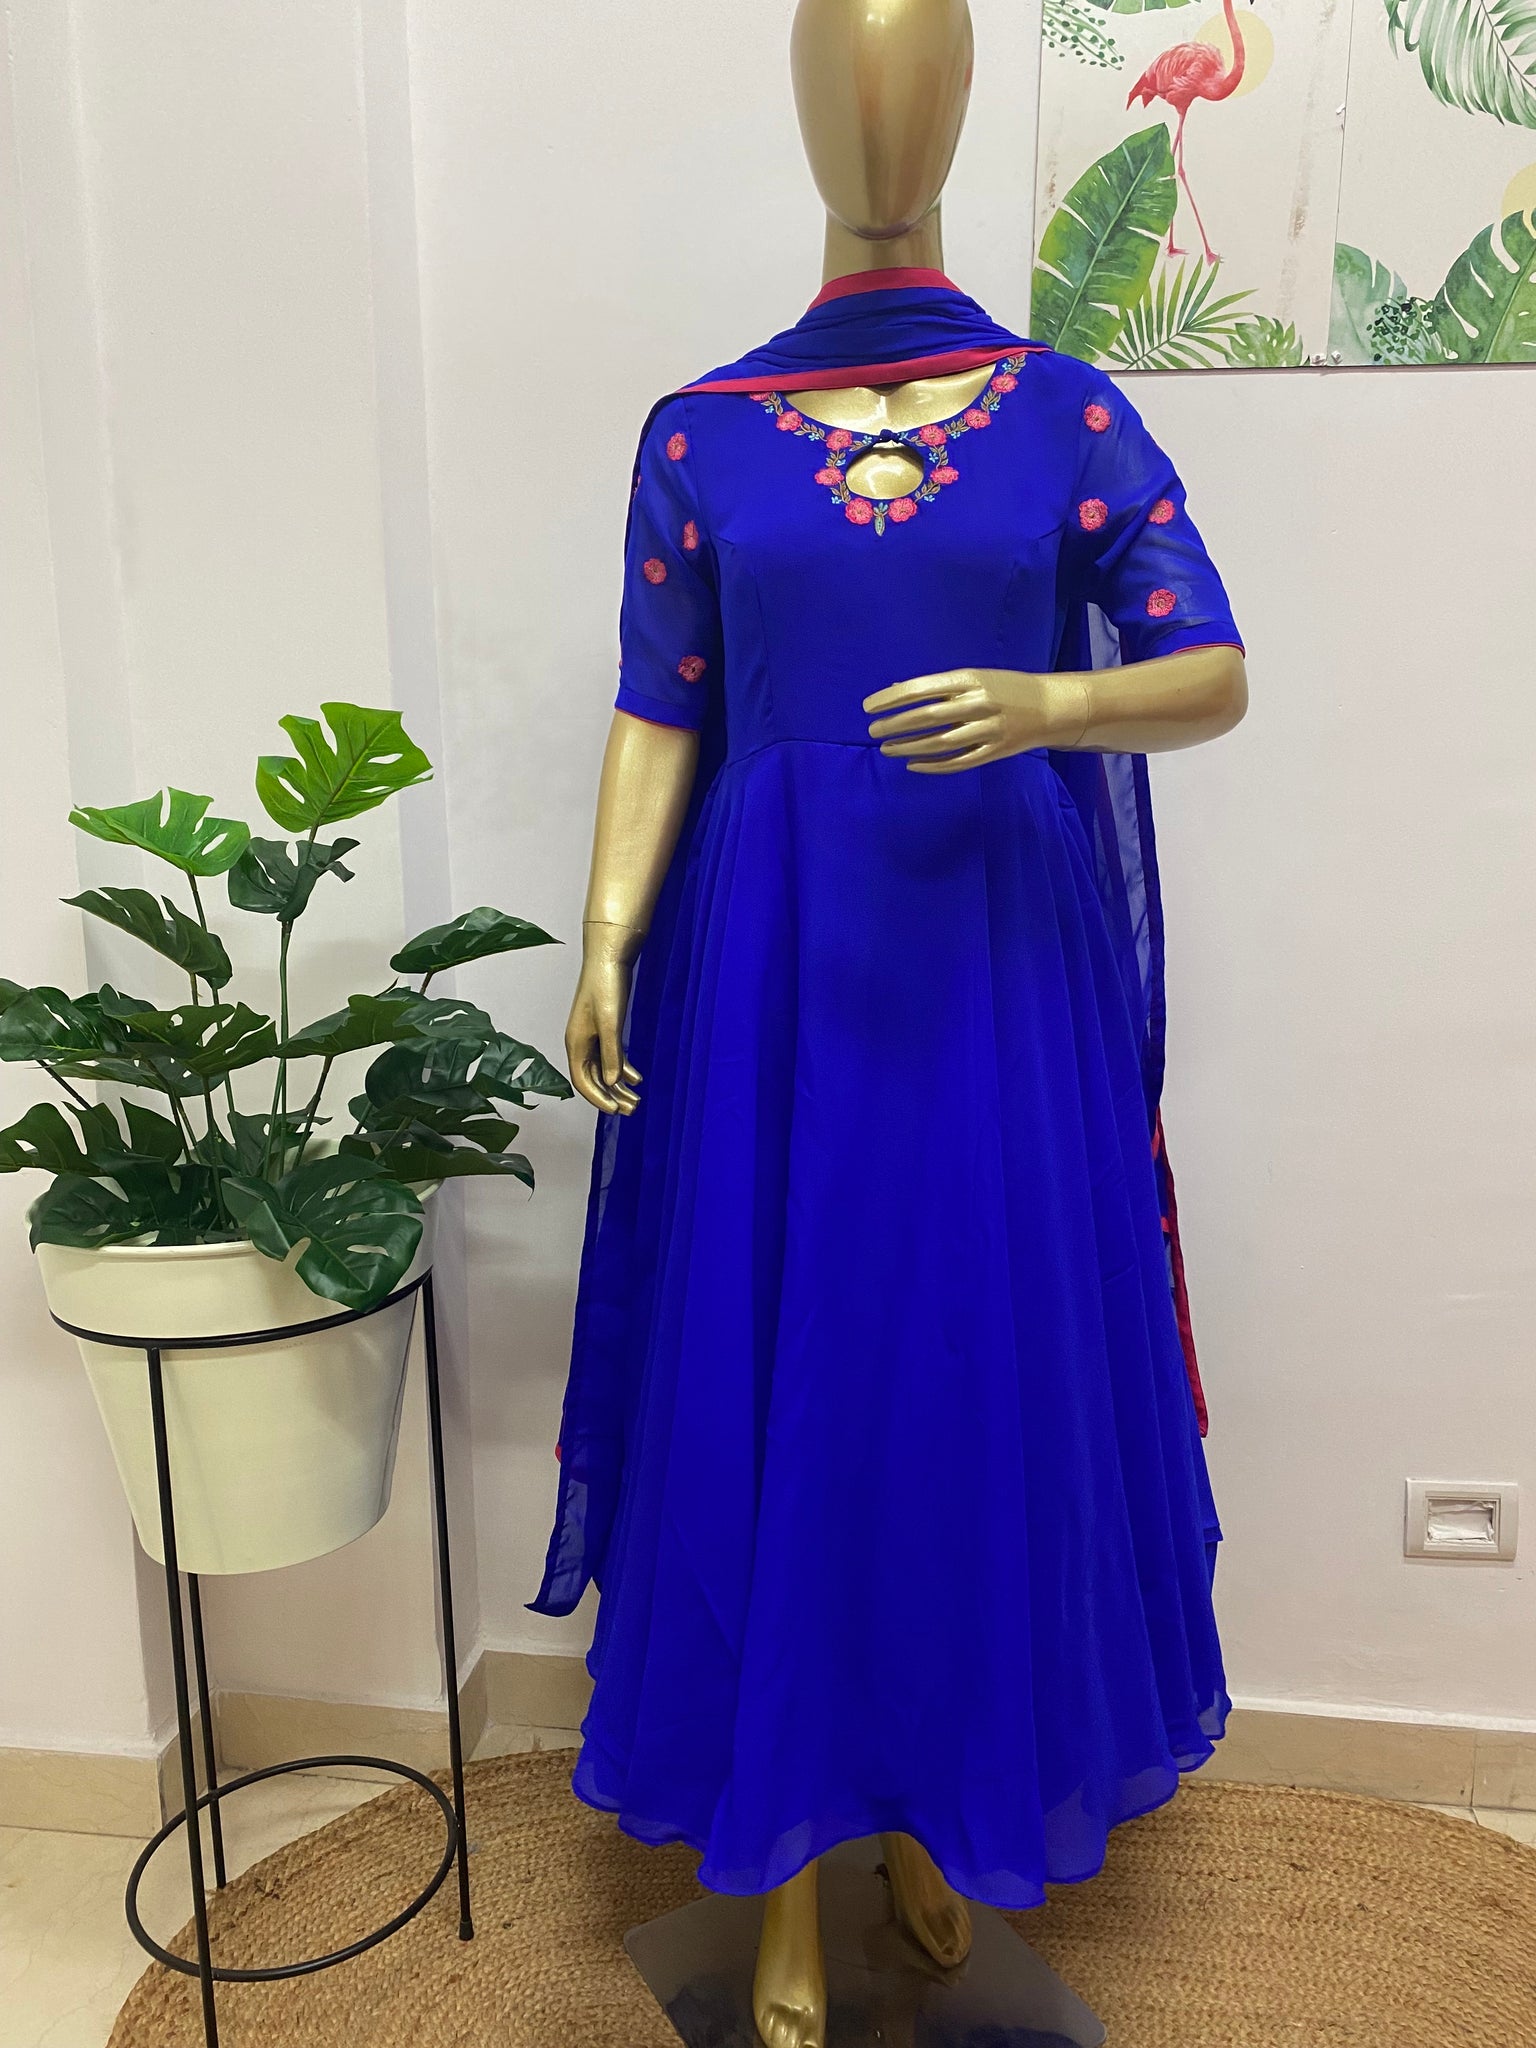 Royal blue embroidered dress